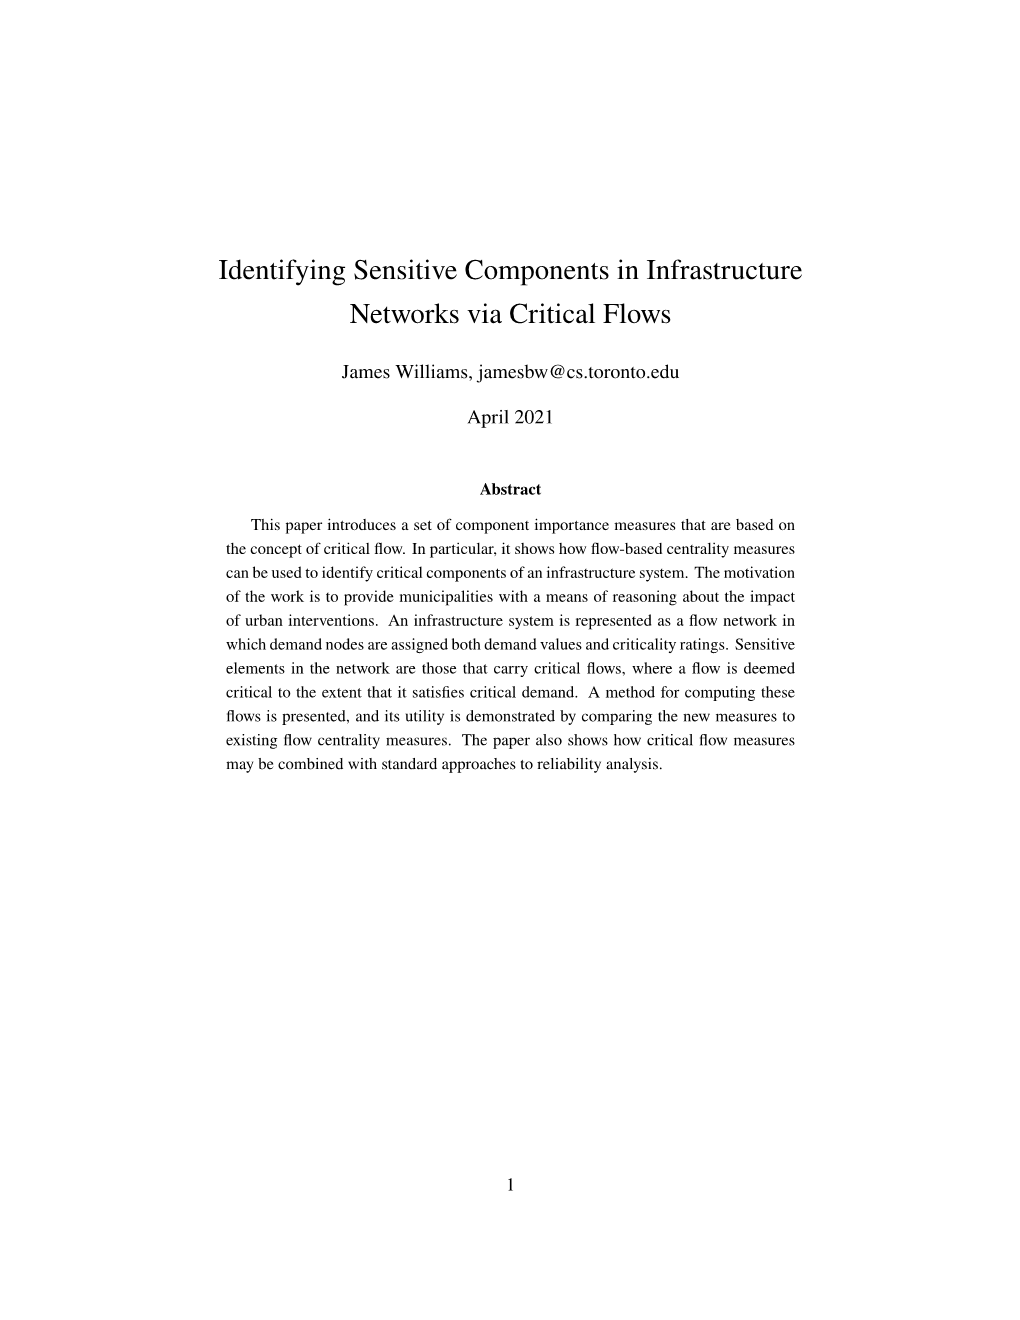 Identifying Sensitive Components in Infrastructure Networks Via Critical Flows